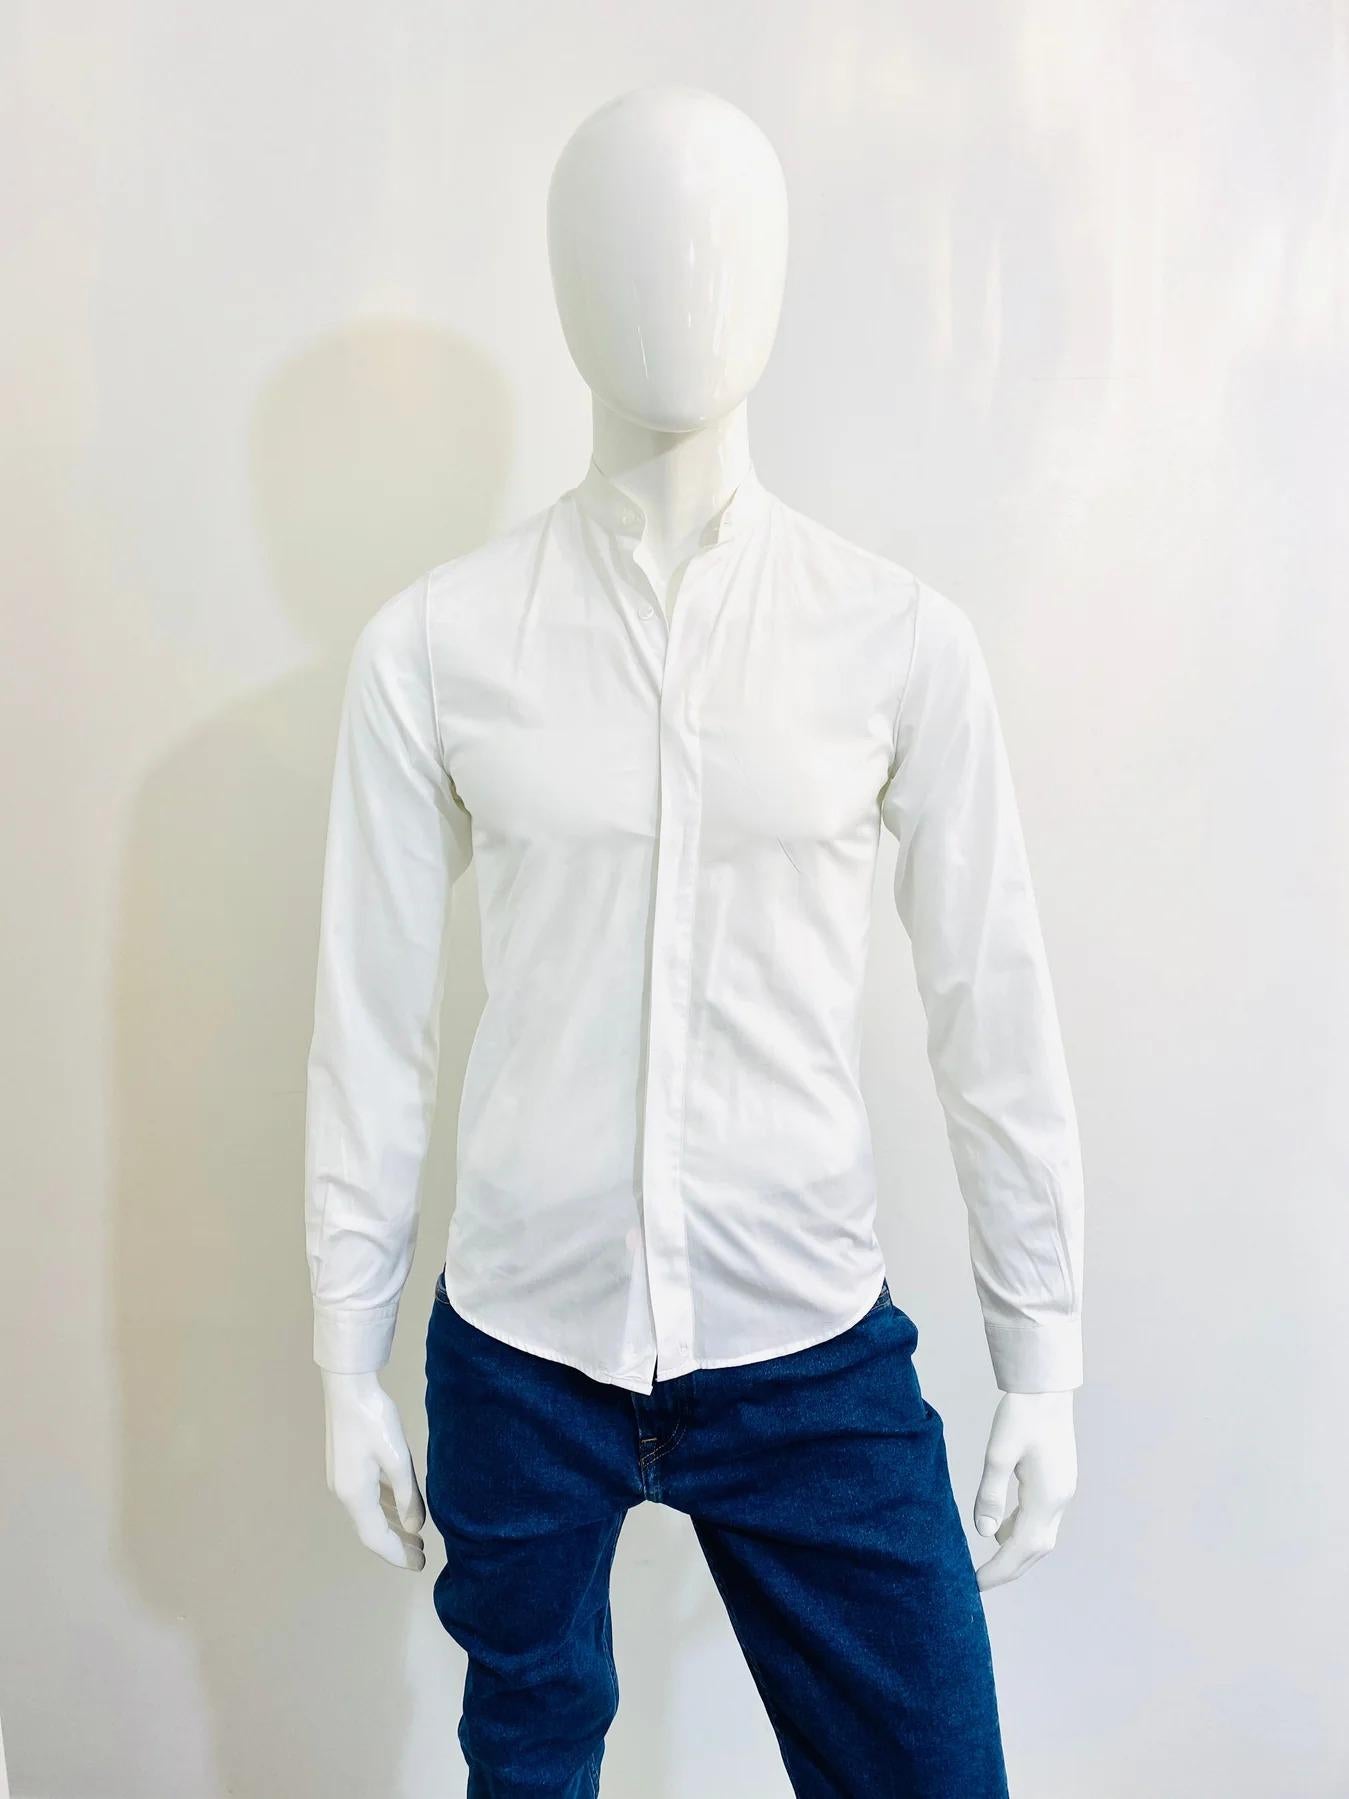 Advani Italian Cotton Shirt.

Bombay collar shirt button down. Hidden button closure. Inverted seams at the shoulder. Back placket and split yoke. No composition label.

Additional information:
Size - S (No size label but corresponds)
Condition –